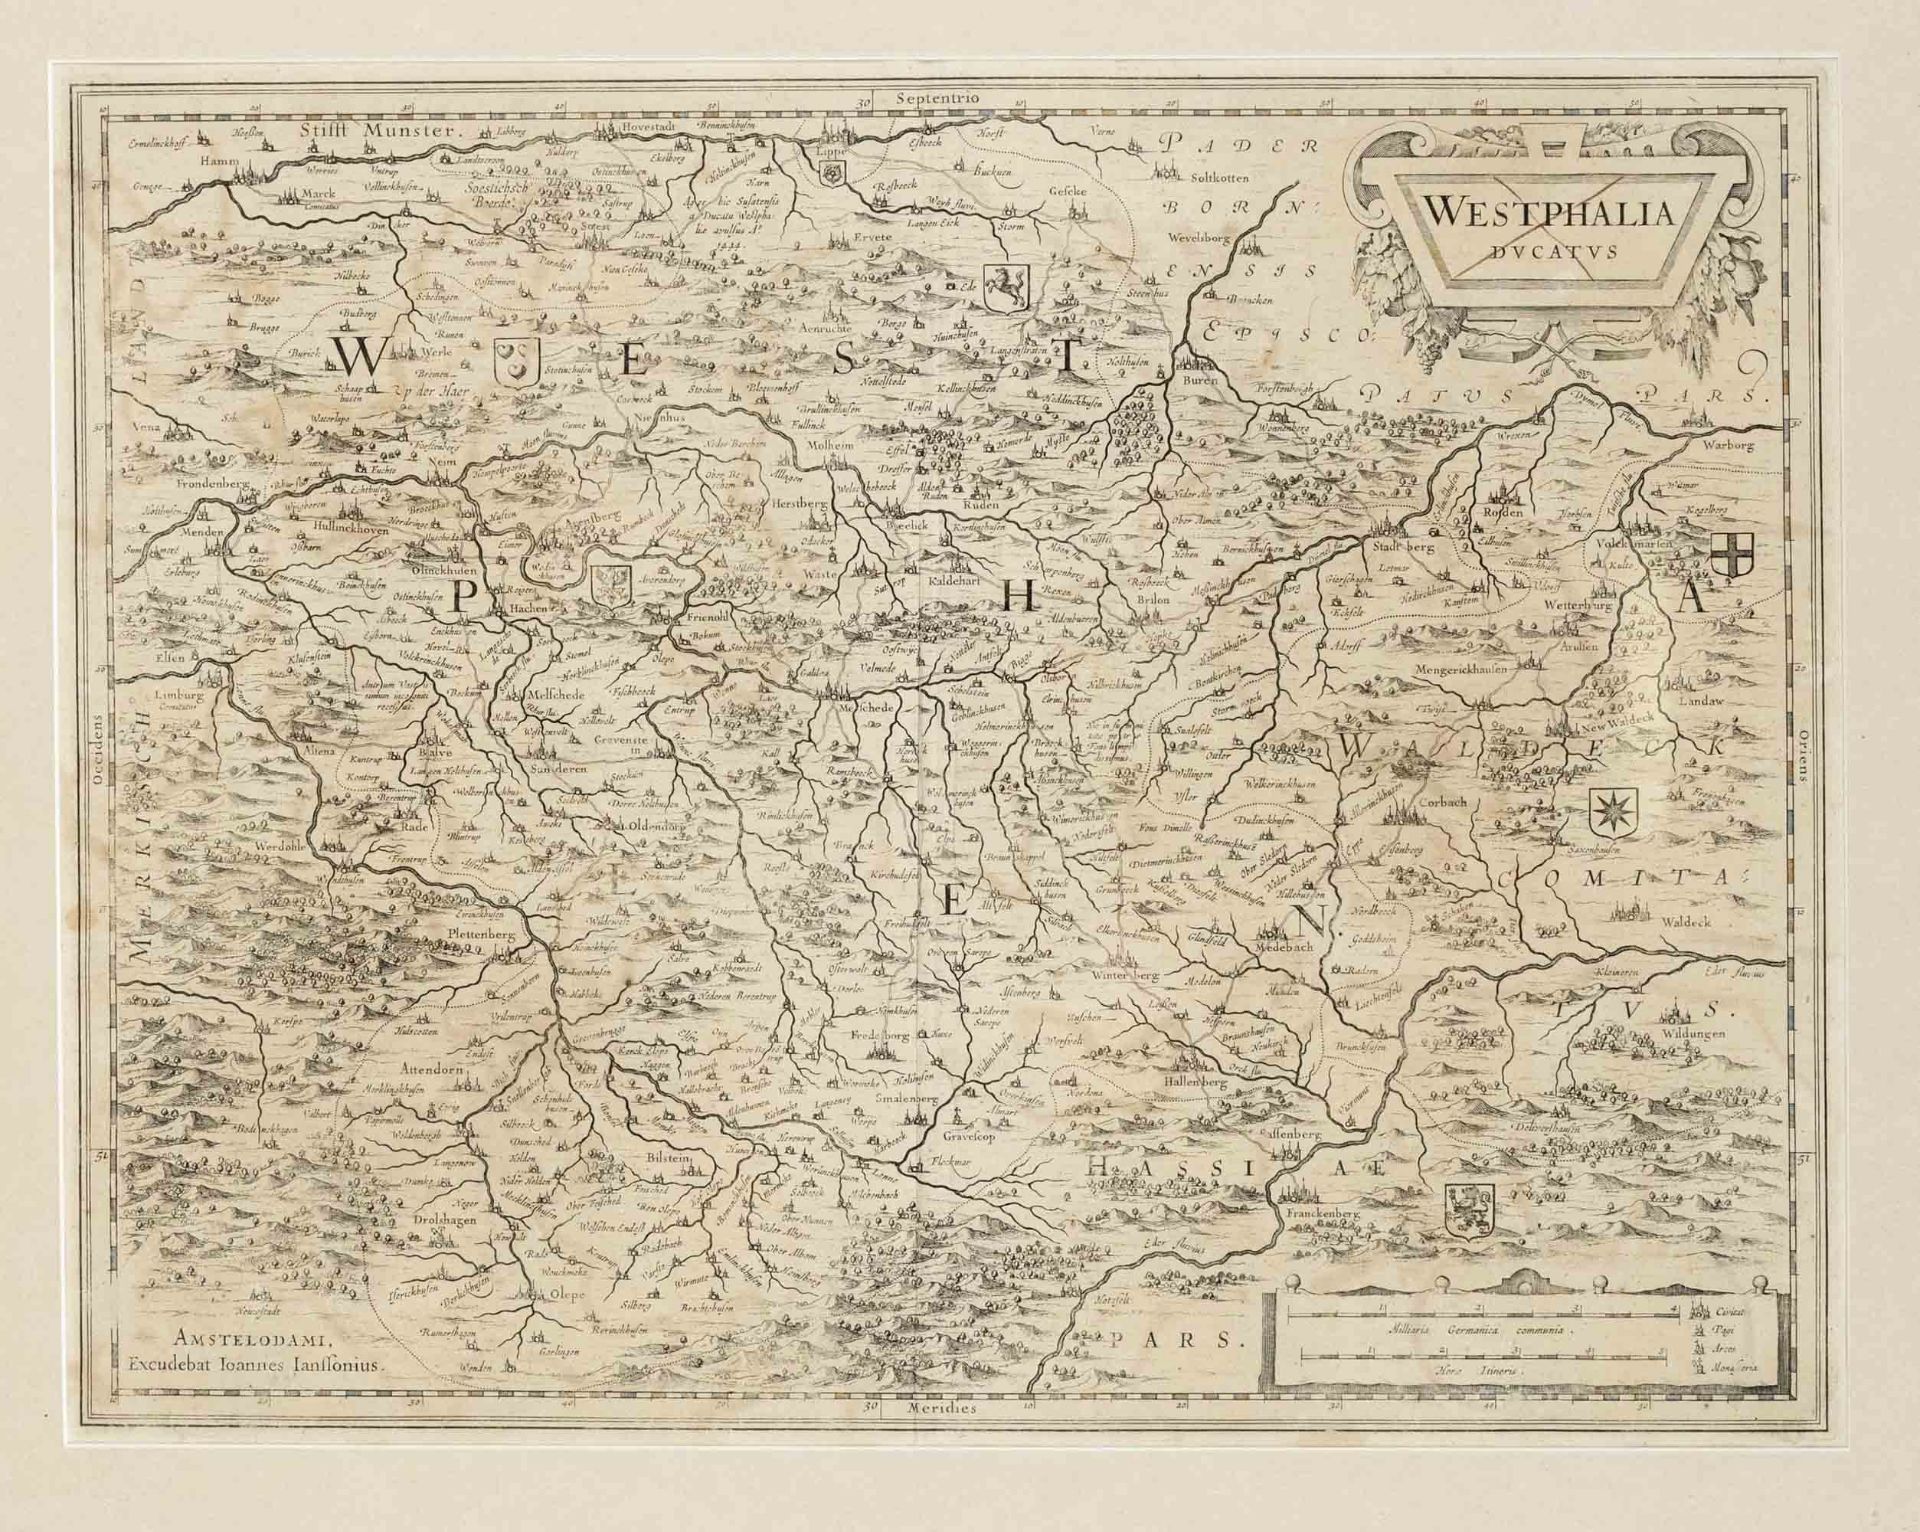 Historical Map of Westphalia, ''Westphalia Ducatus'', copper engraved map of the historical Duchy of